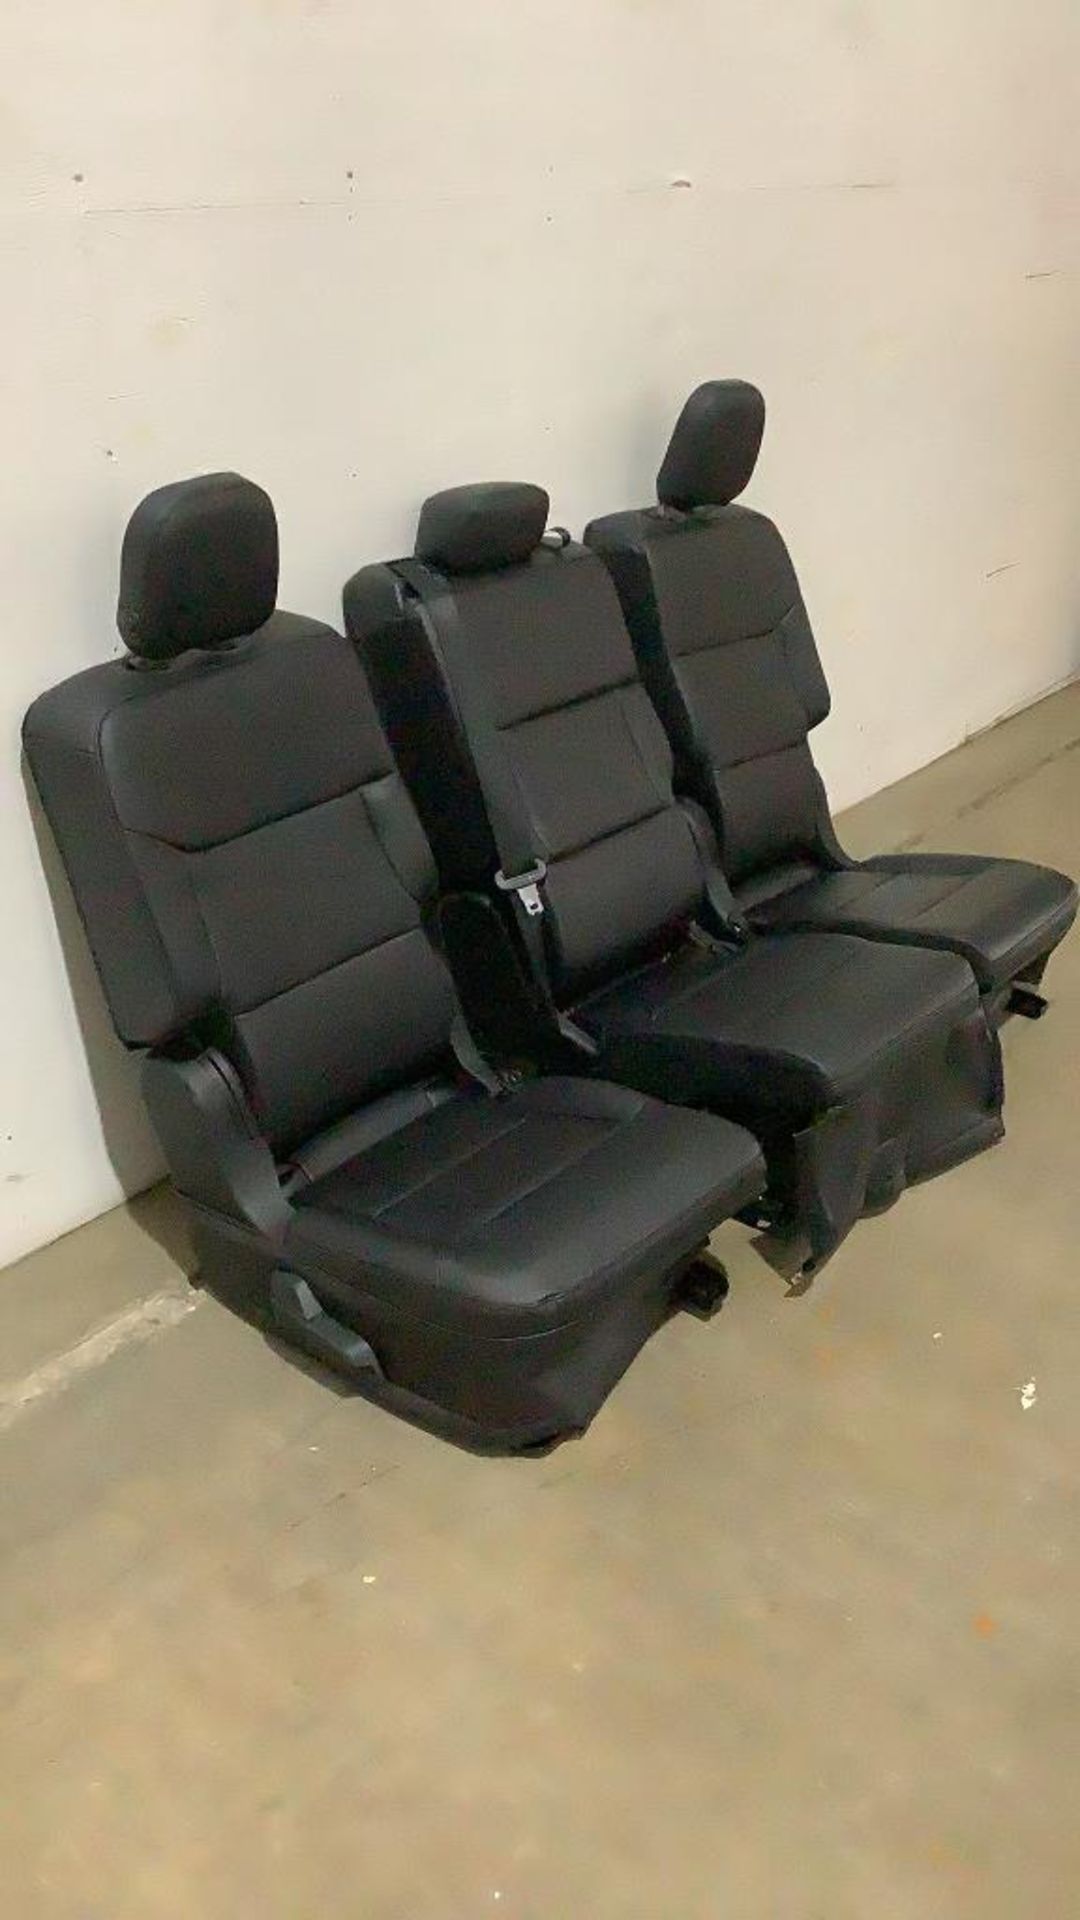 2020 Ford Explorer Set of Rear Seats - Image 5 of 12